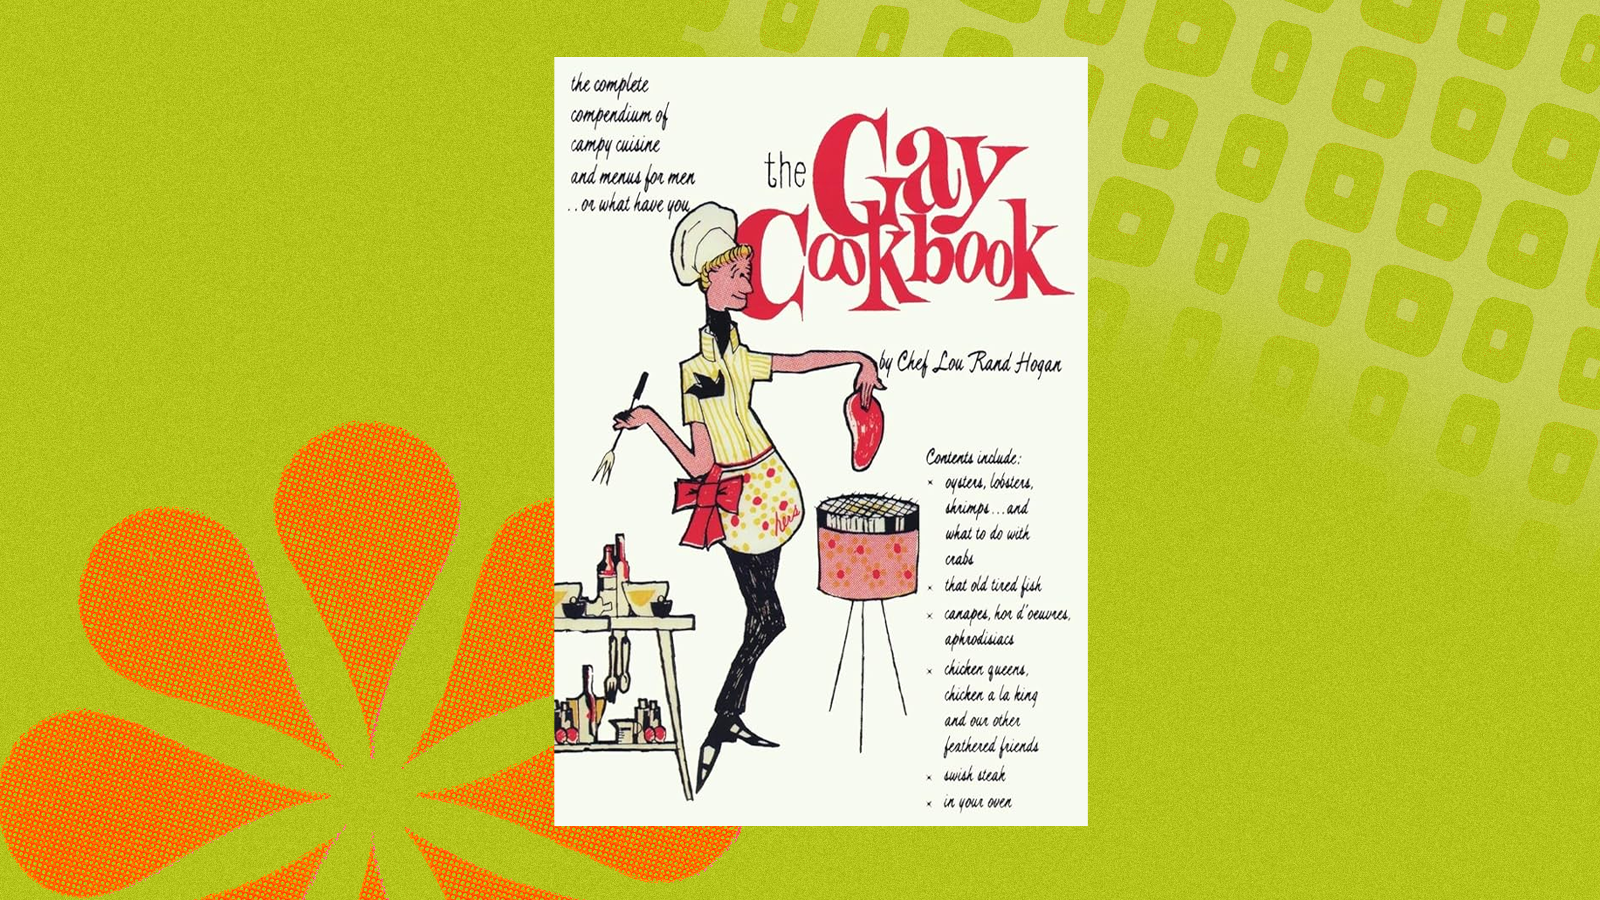 The cover of The Gay Cookbook, which features an illustration of a person in chef’s hat putting a piece of meat in a pot